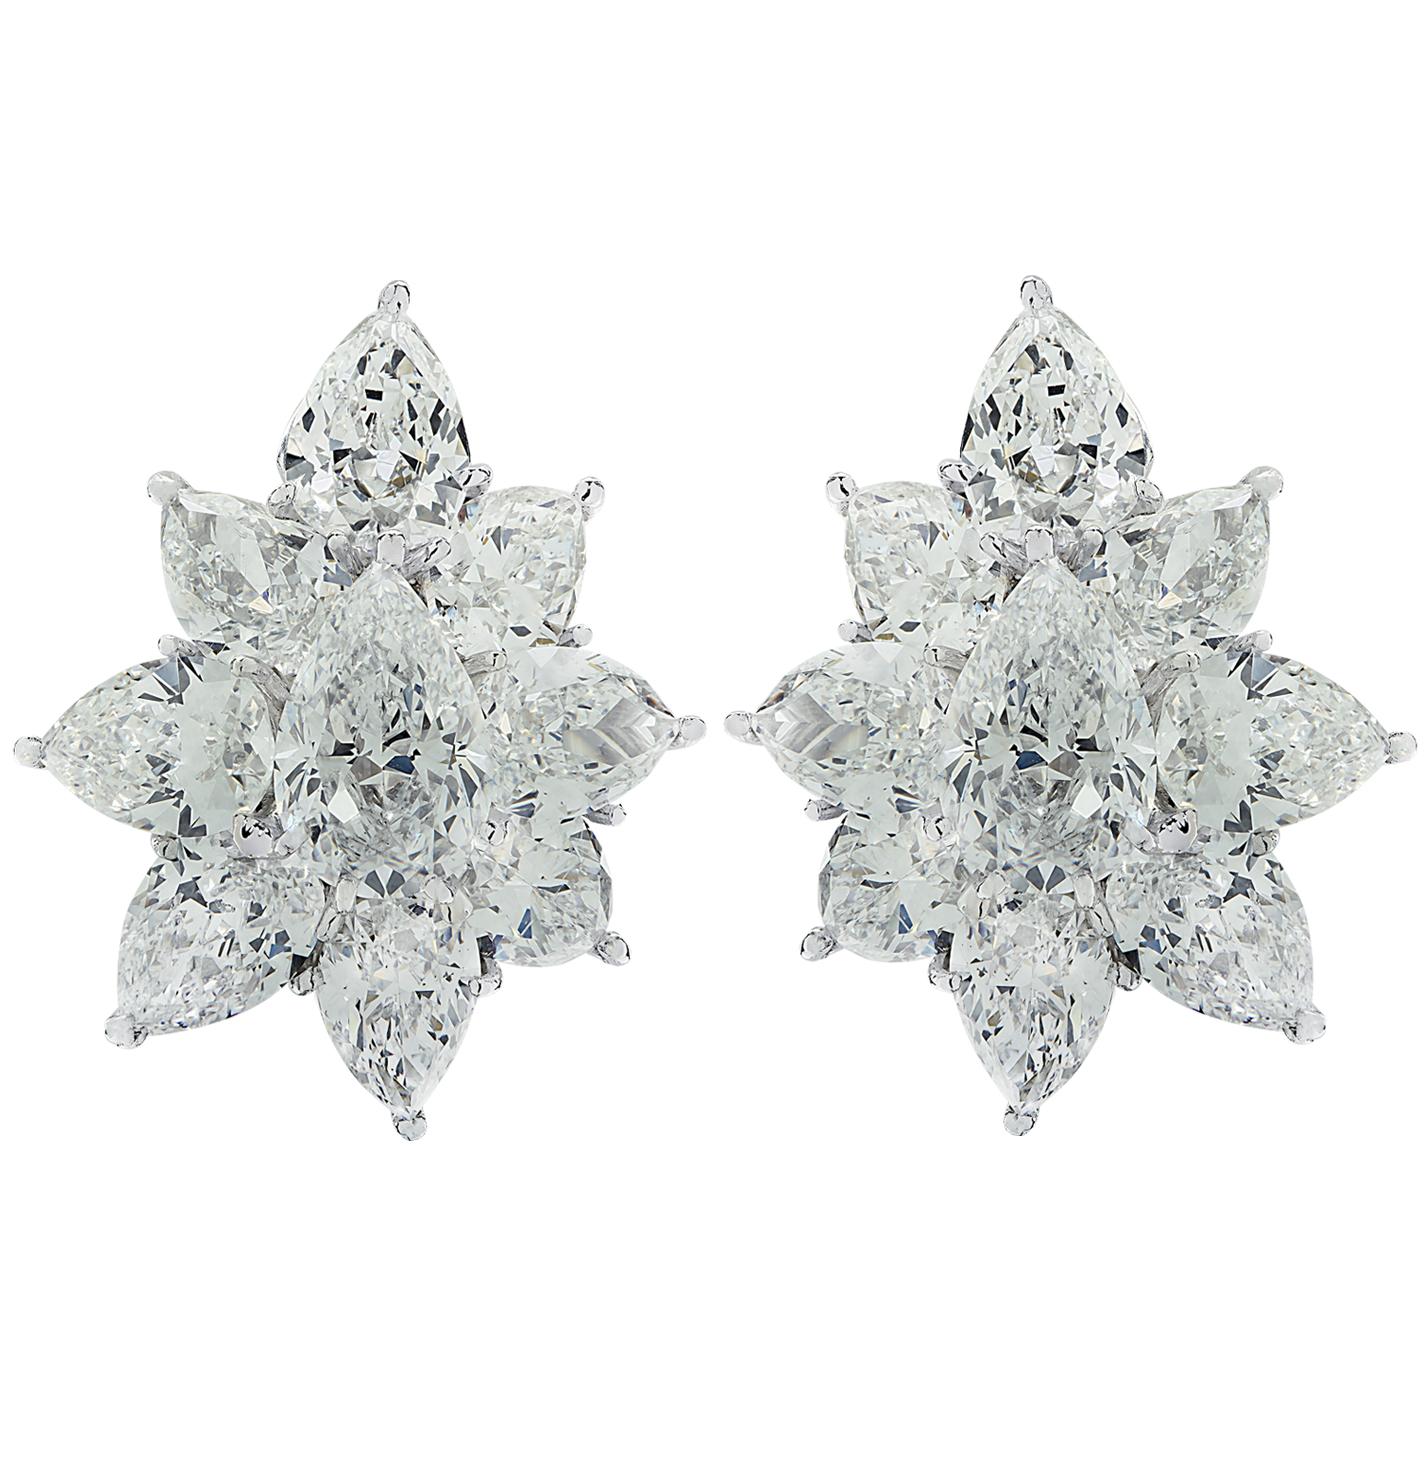 From the House of Cartier, these striking Cartier diamond cluster earrings are hand crafted in platinum, and feature 18 pear shape diamonds weighing 19.80 carats total, D-F color, VS – SI clarity. Each diamond was carefully selected, perfectly